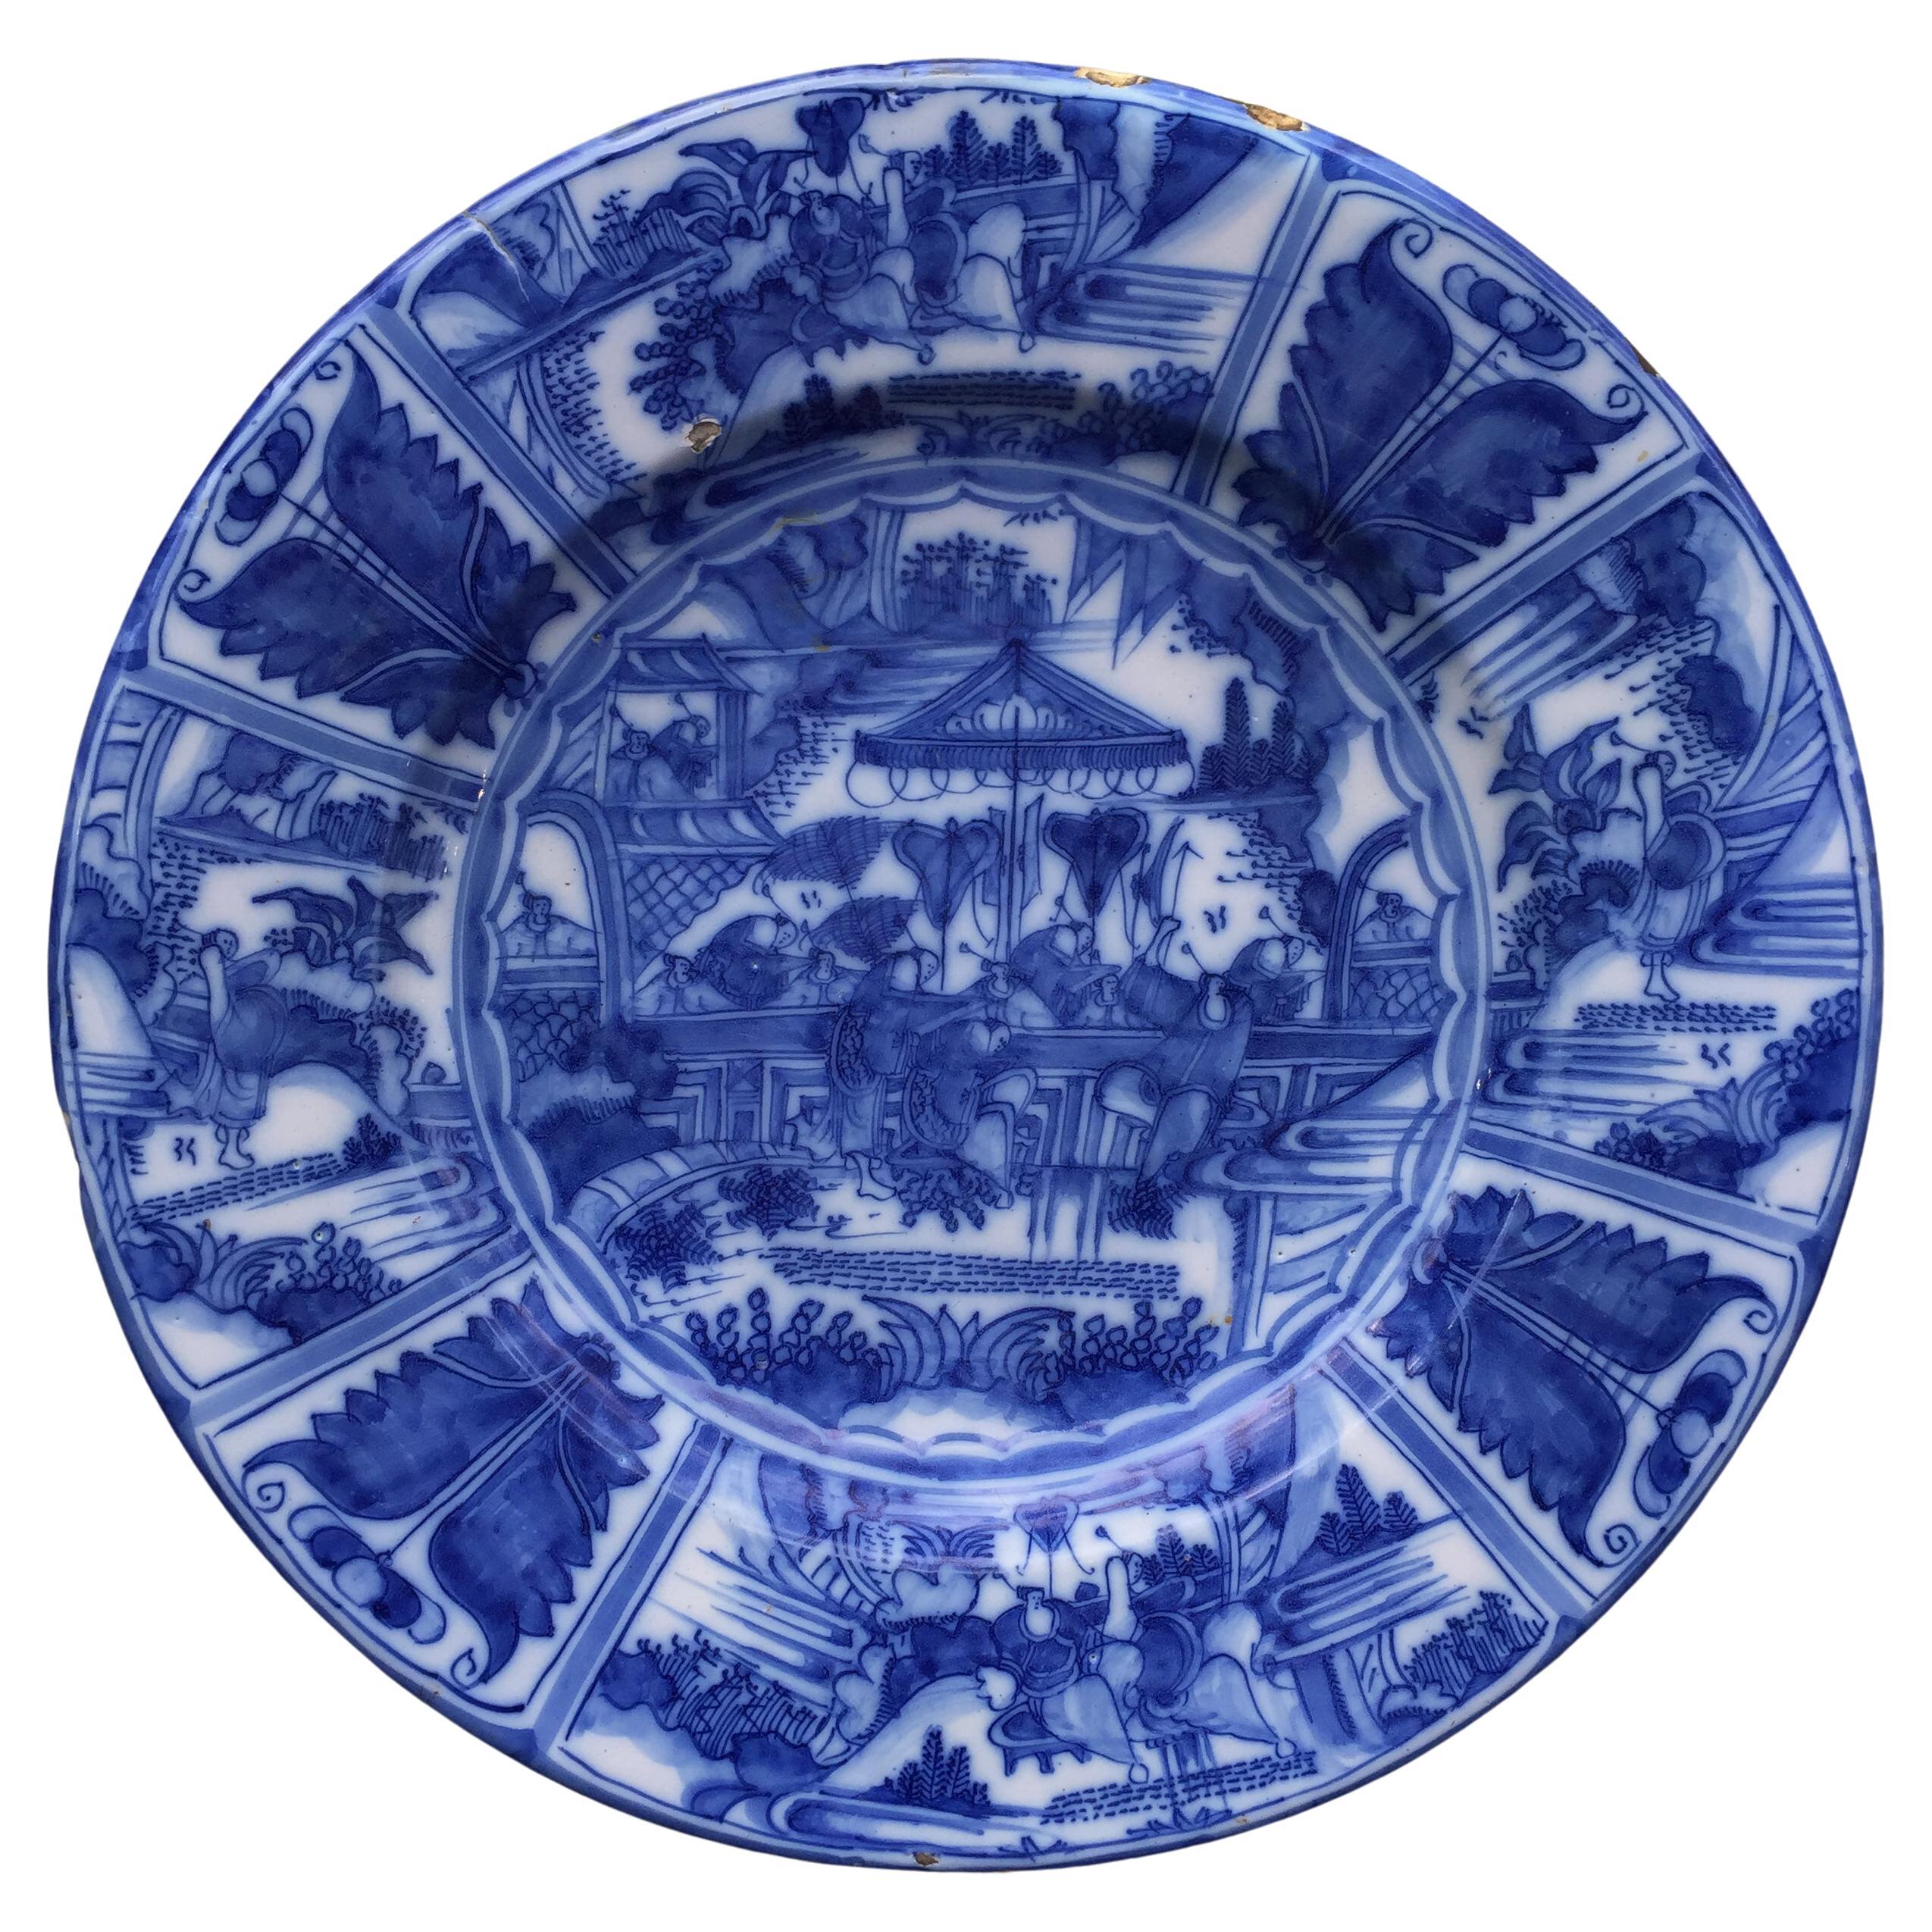 Large Dutch Delft Charger with Chinoiserie Design, 17th Century